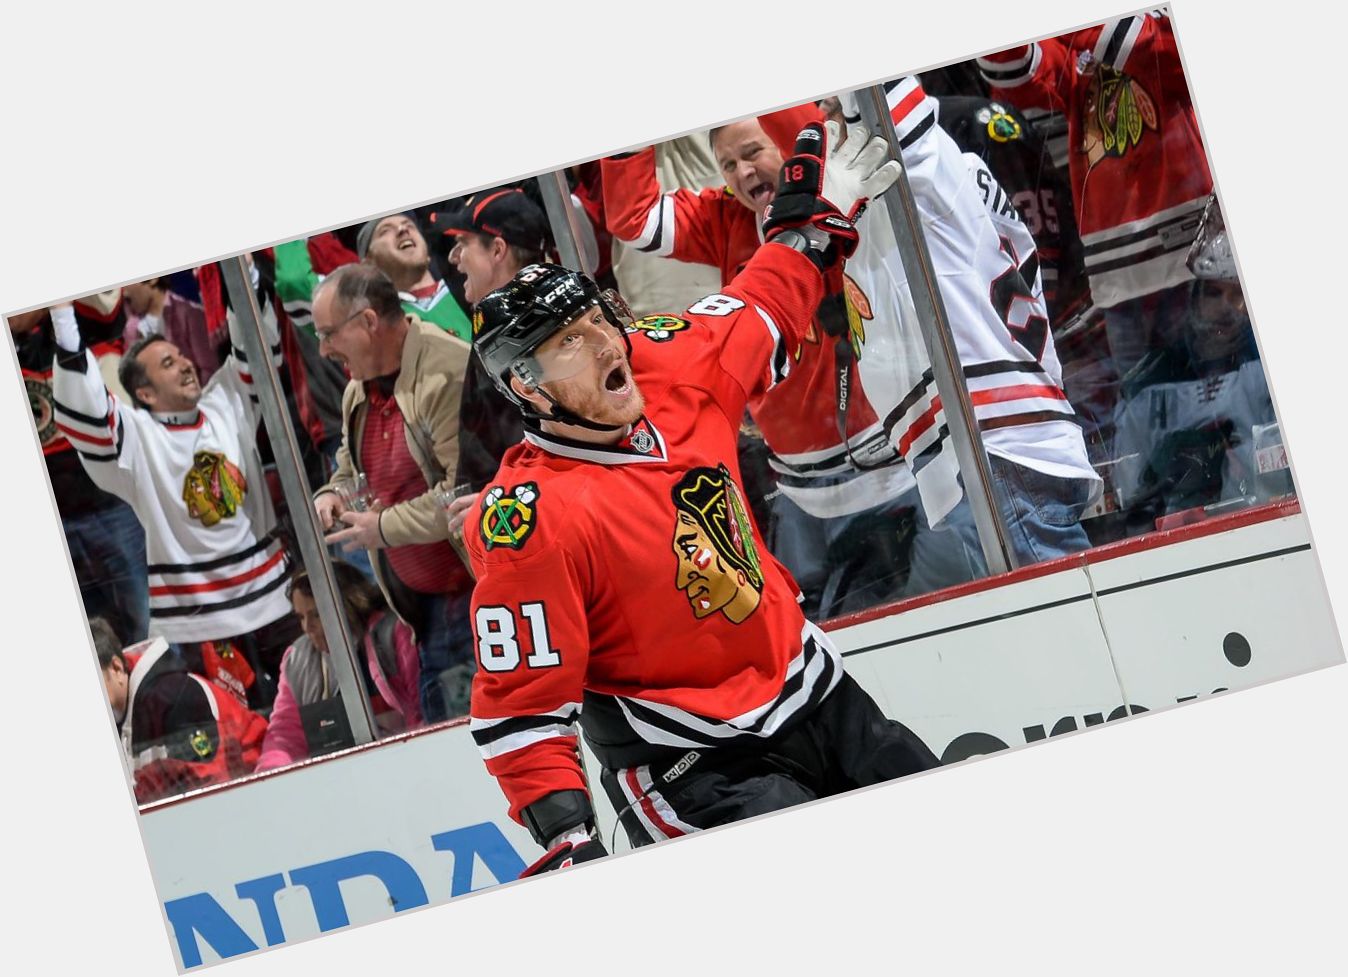 Happy birthday to Marian Hossa born on this day in 1979.  